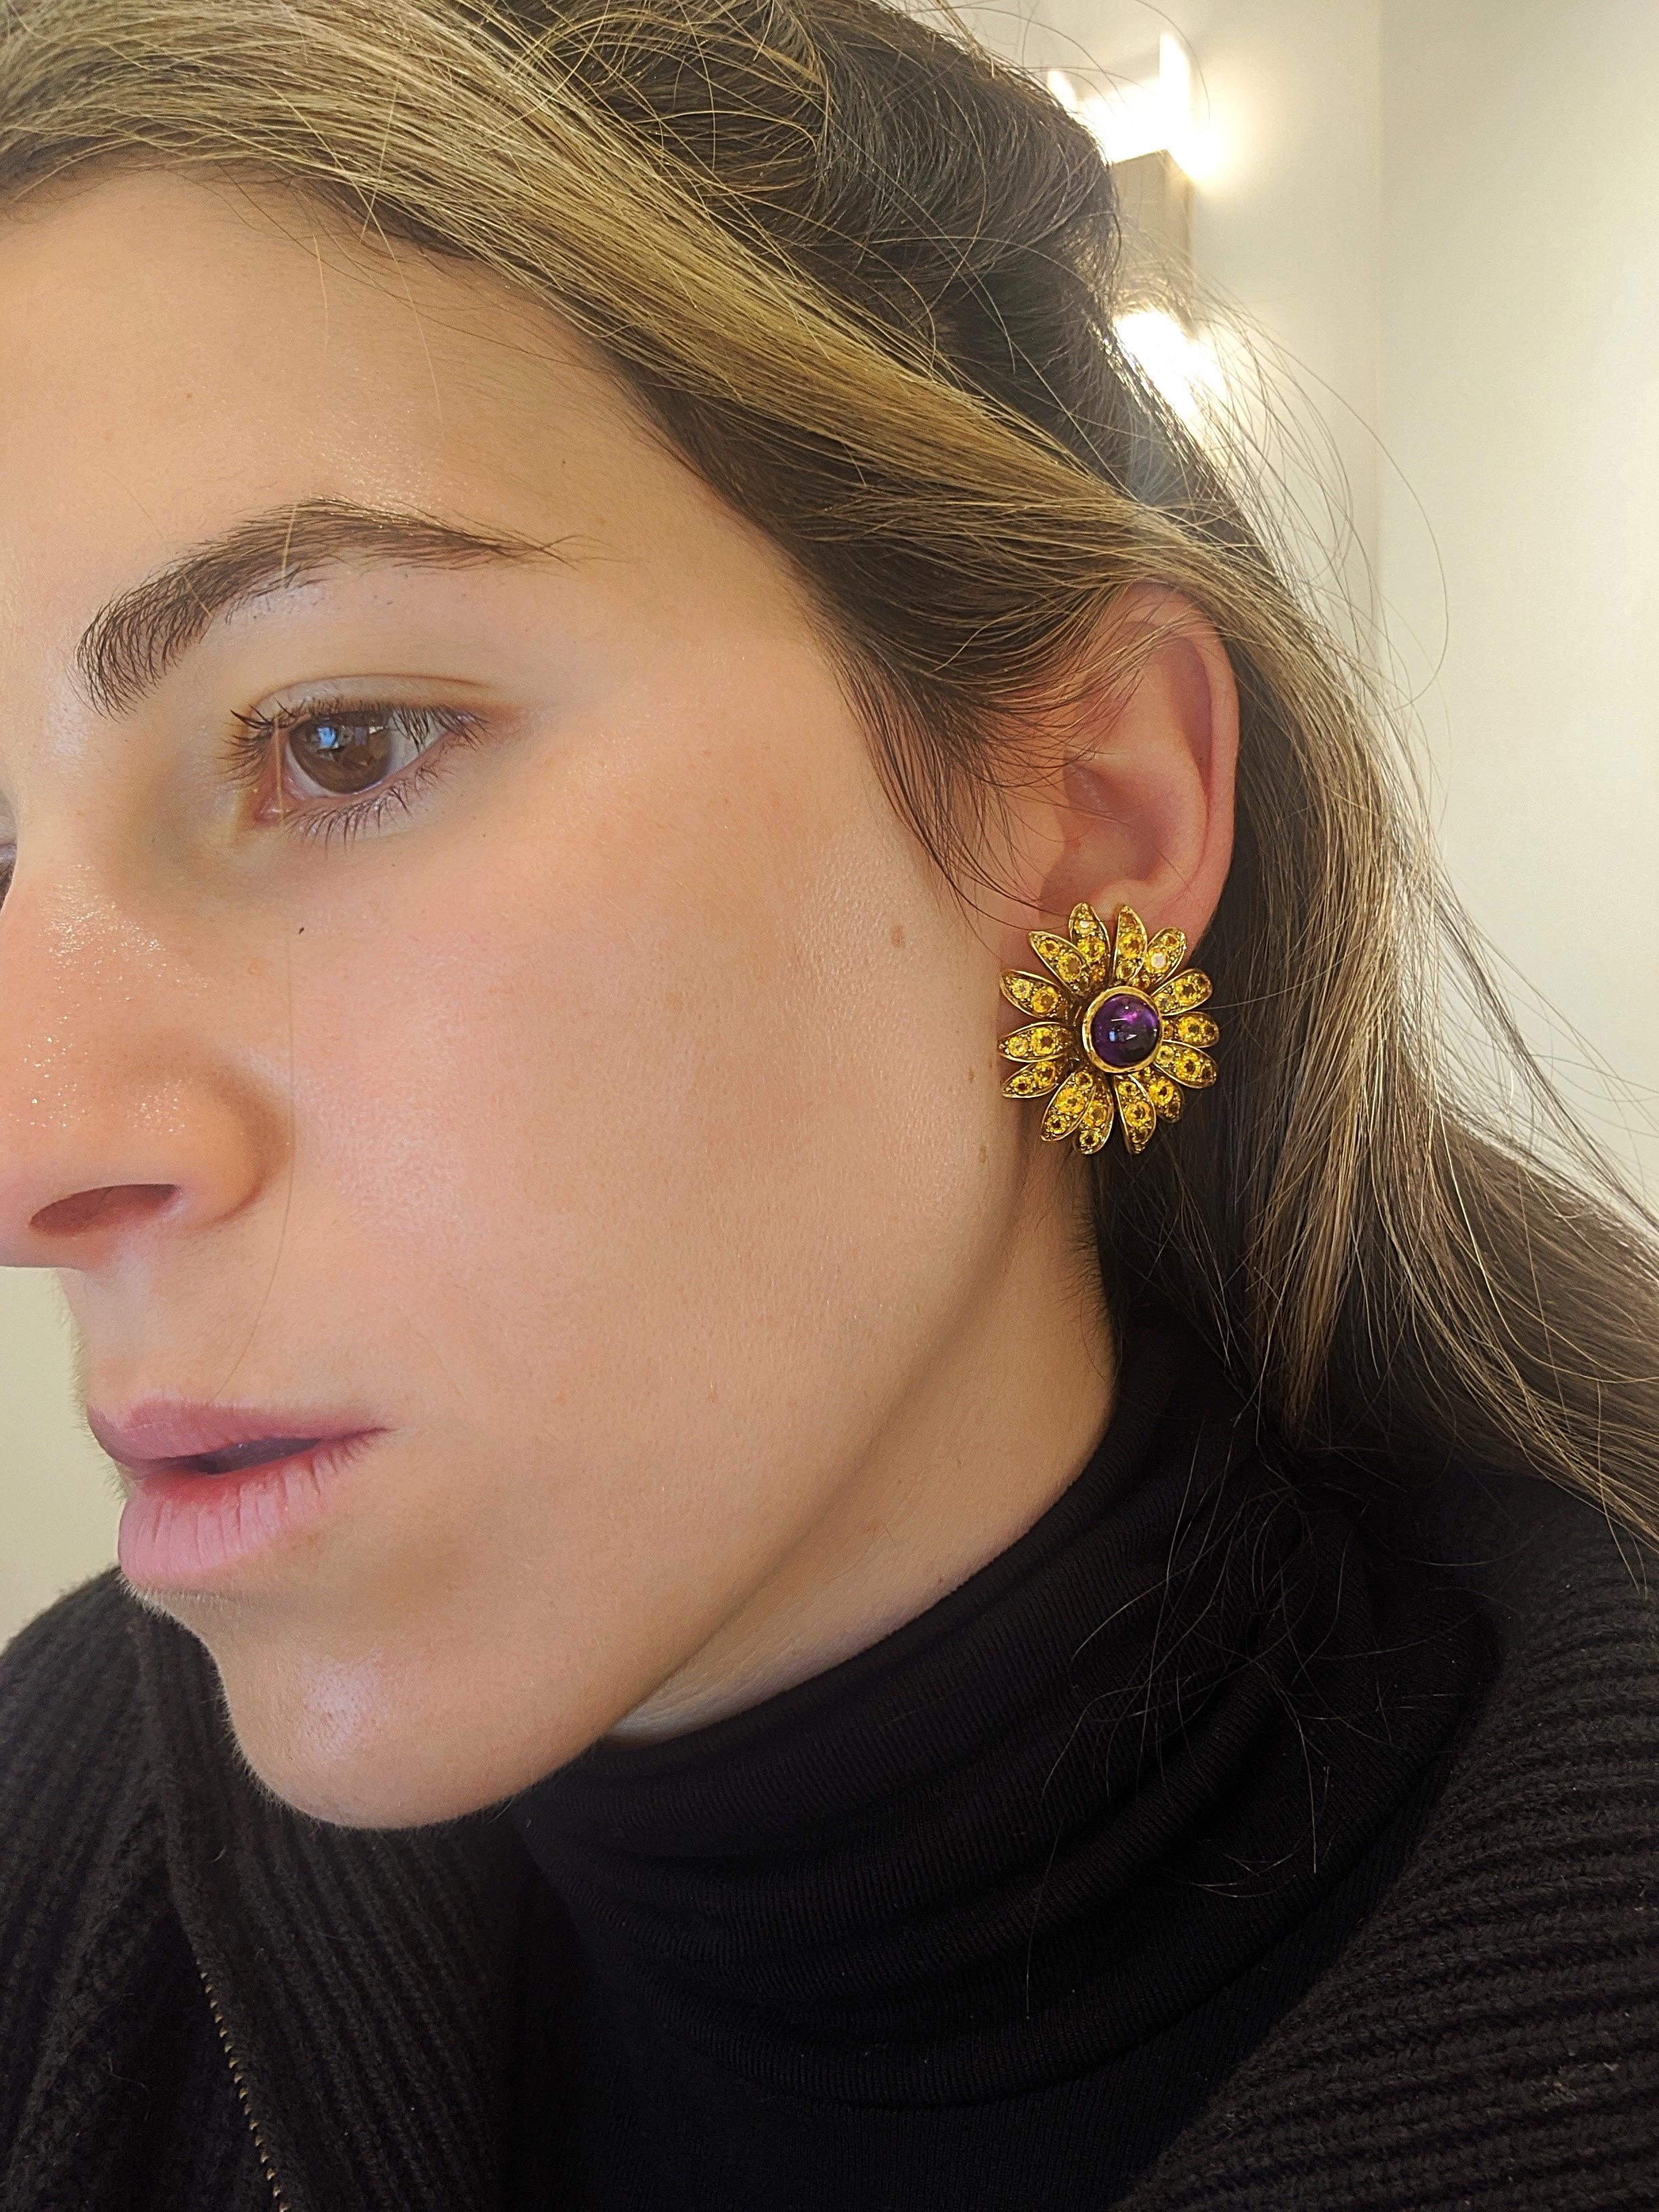 Round Cut Jean Vitau 18 Karat Yellow Gold Sunflower Earrings Yellow Sapphires and Amethyst For Sale